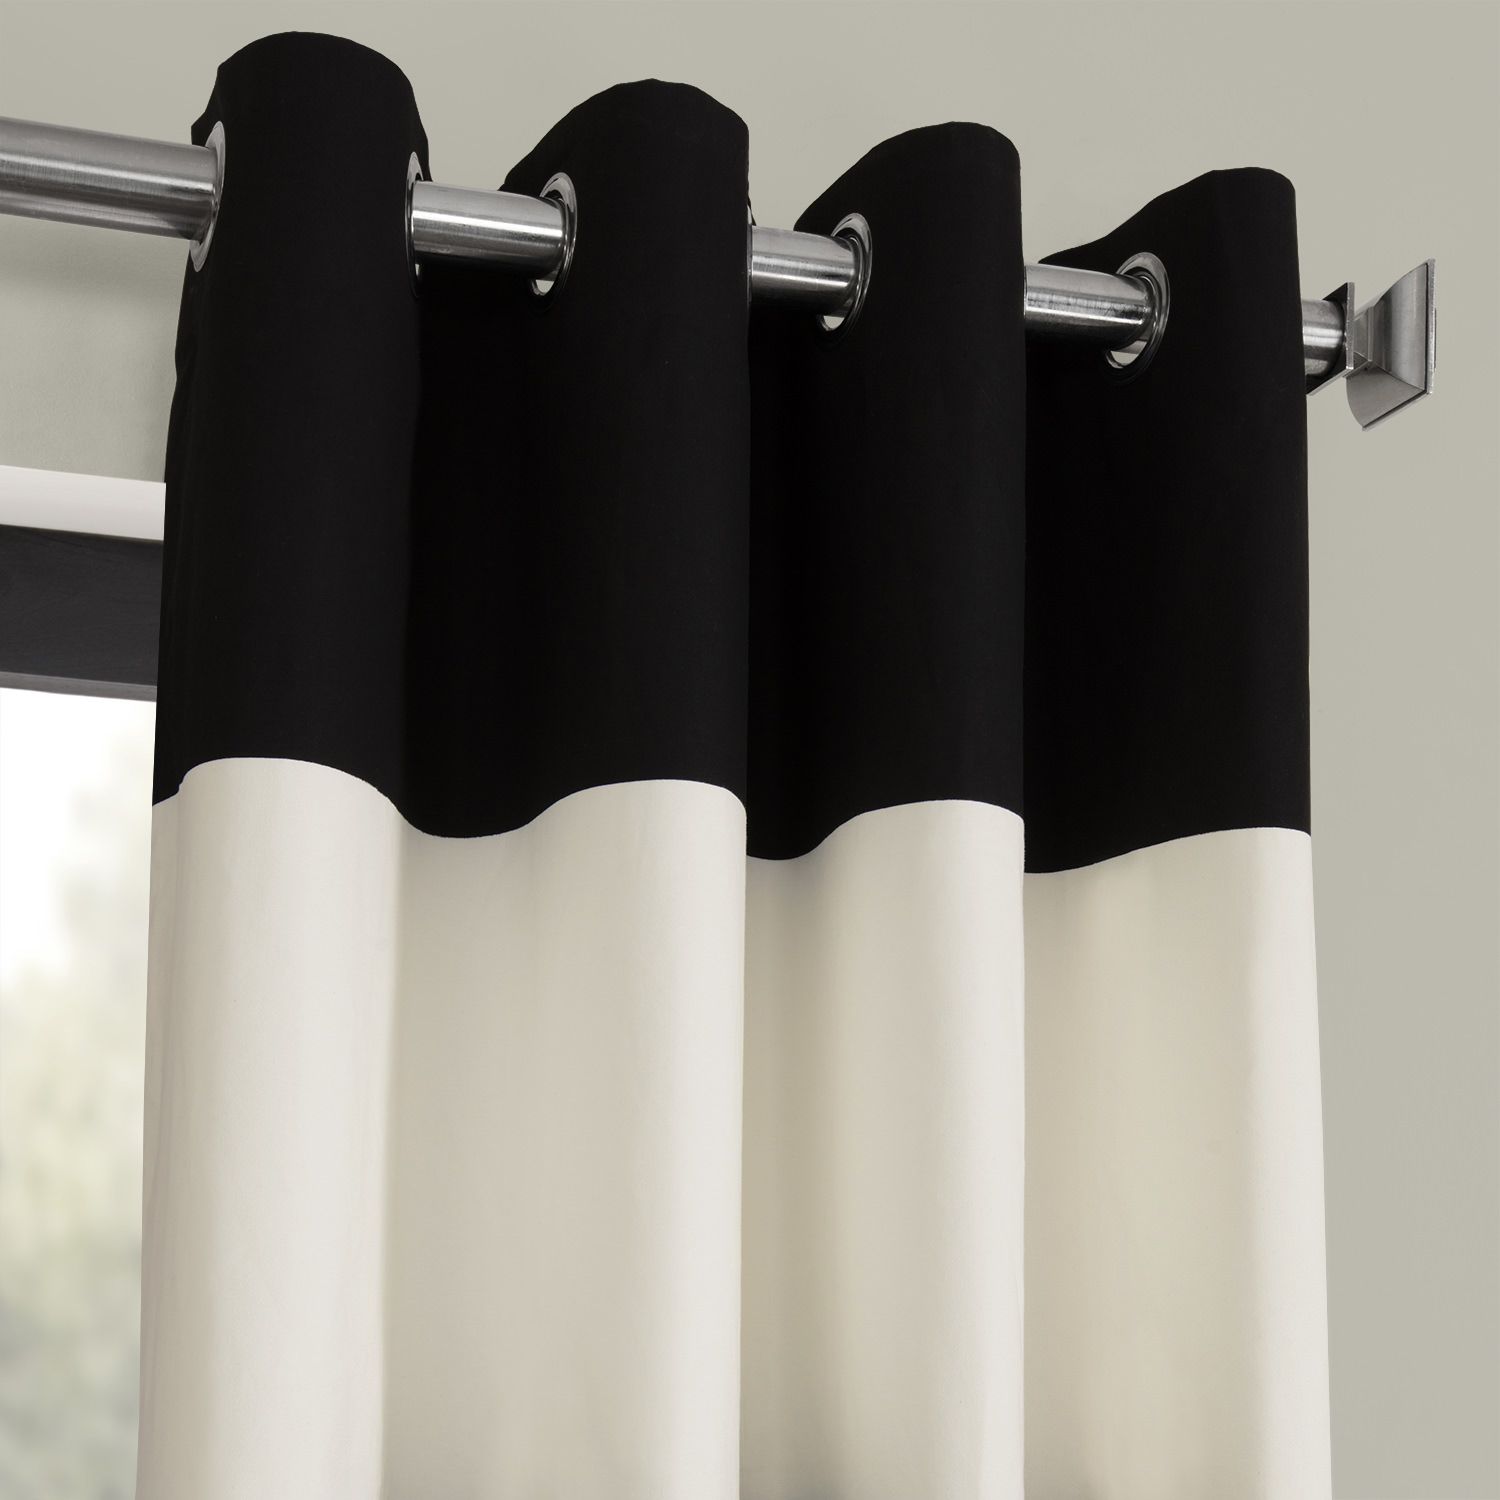 Black Curtains: Add Drama and Sophistication to Your Home with Black Curtains